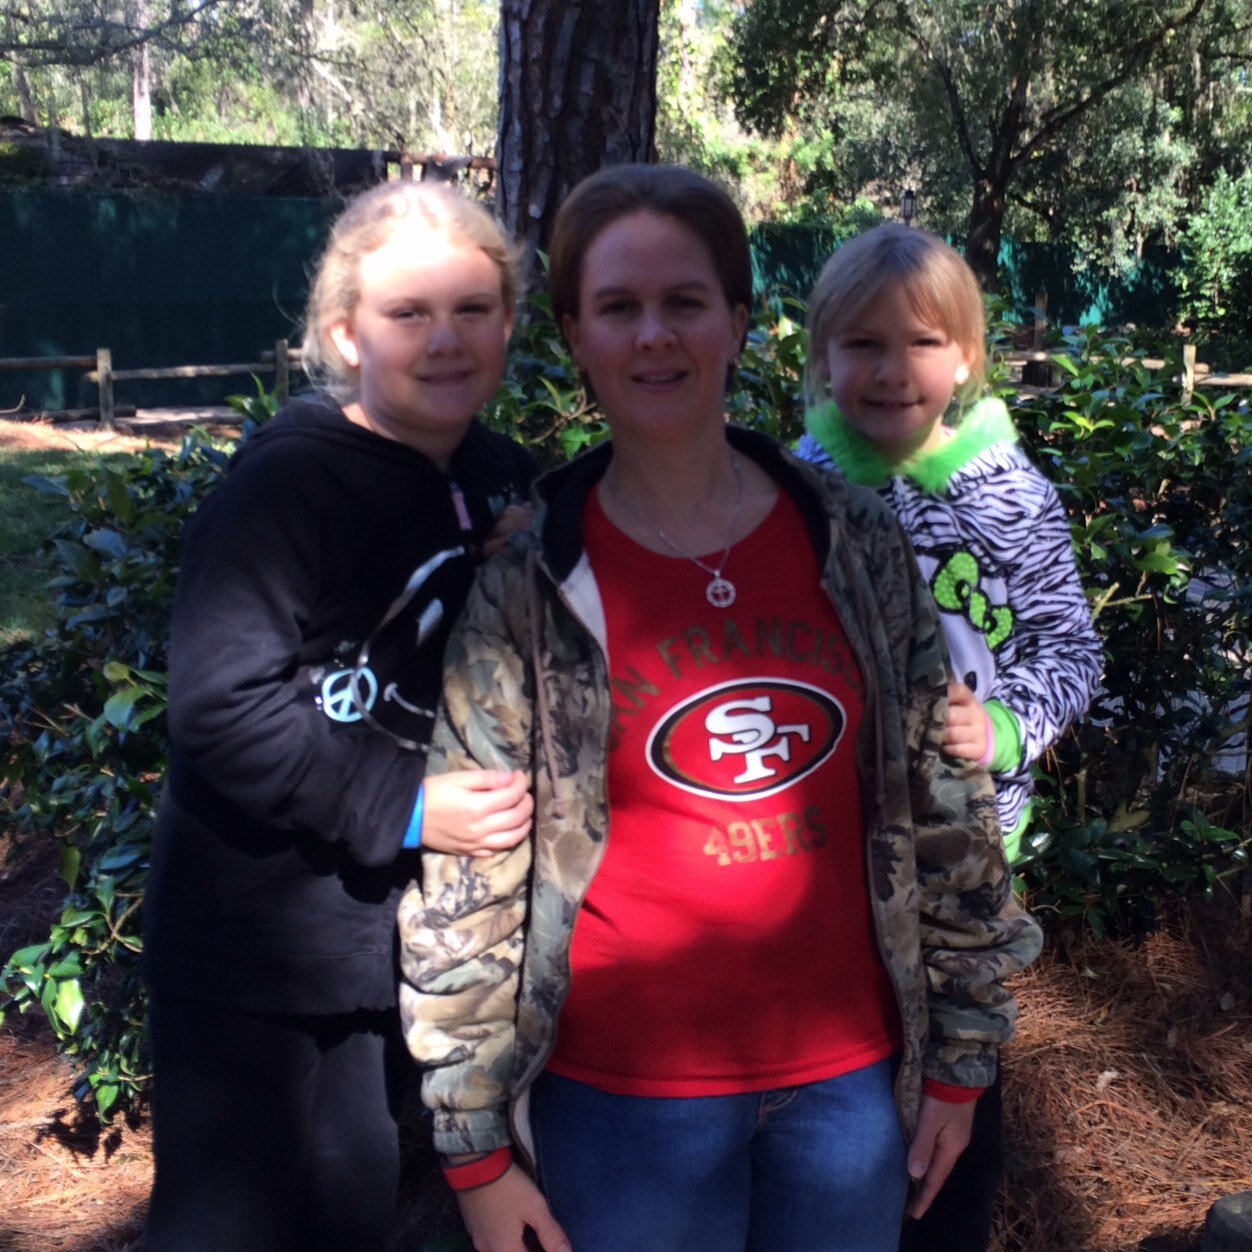 I am married with 2 daughters! Love sports, music, and camping! My kids are my life!!